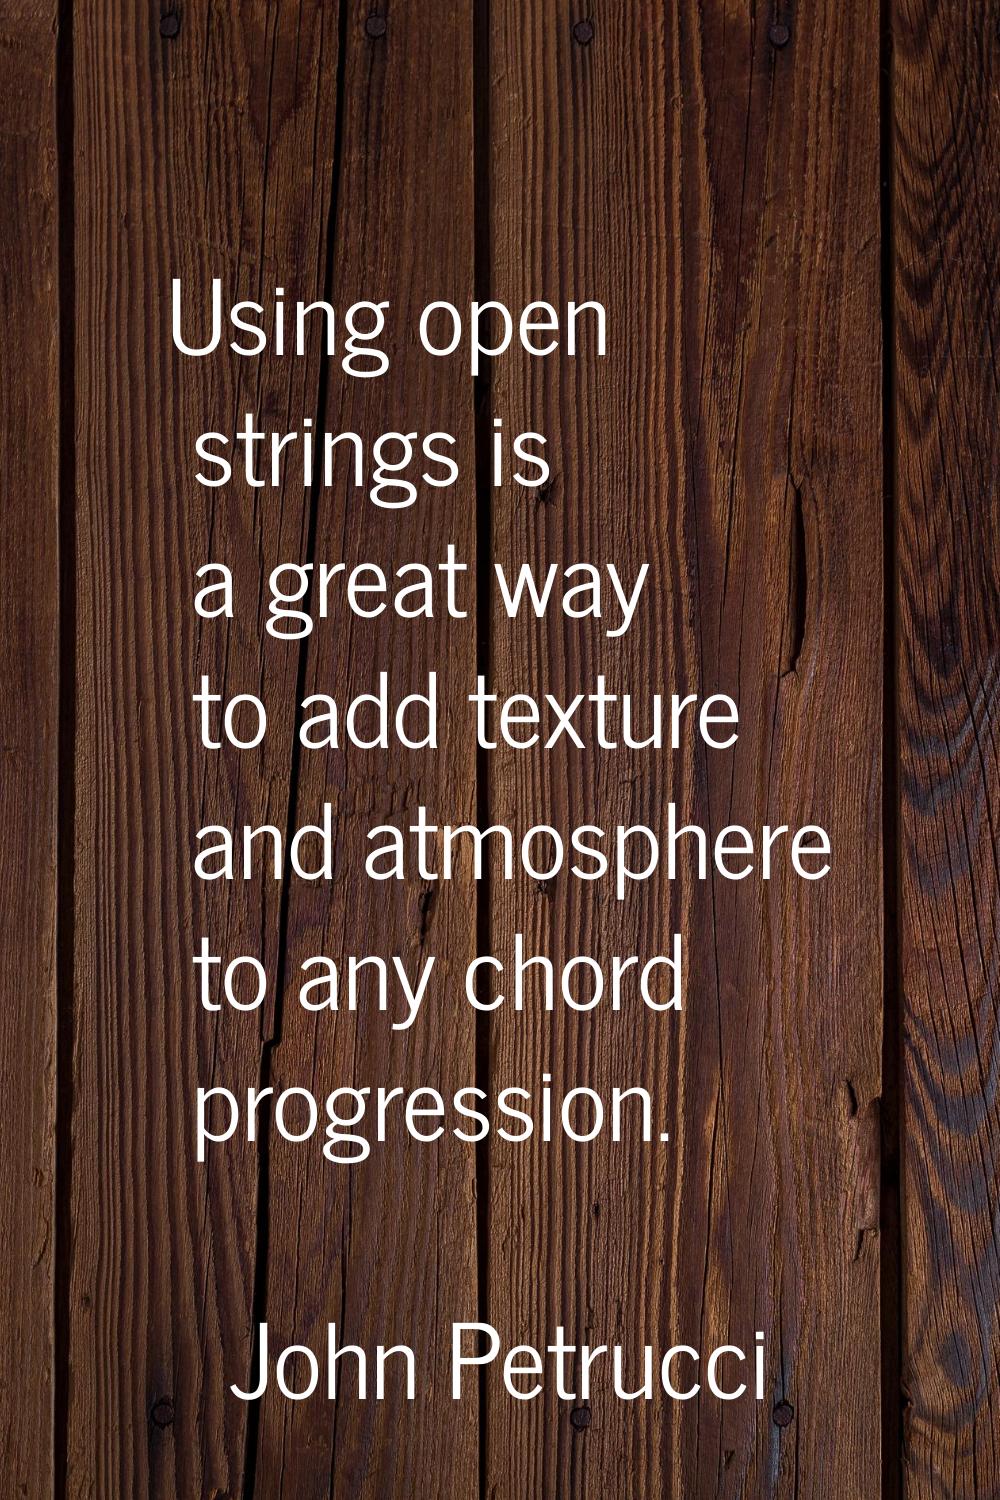 Using open strings is a great way to add texture and atmosphere to any chord progression.